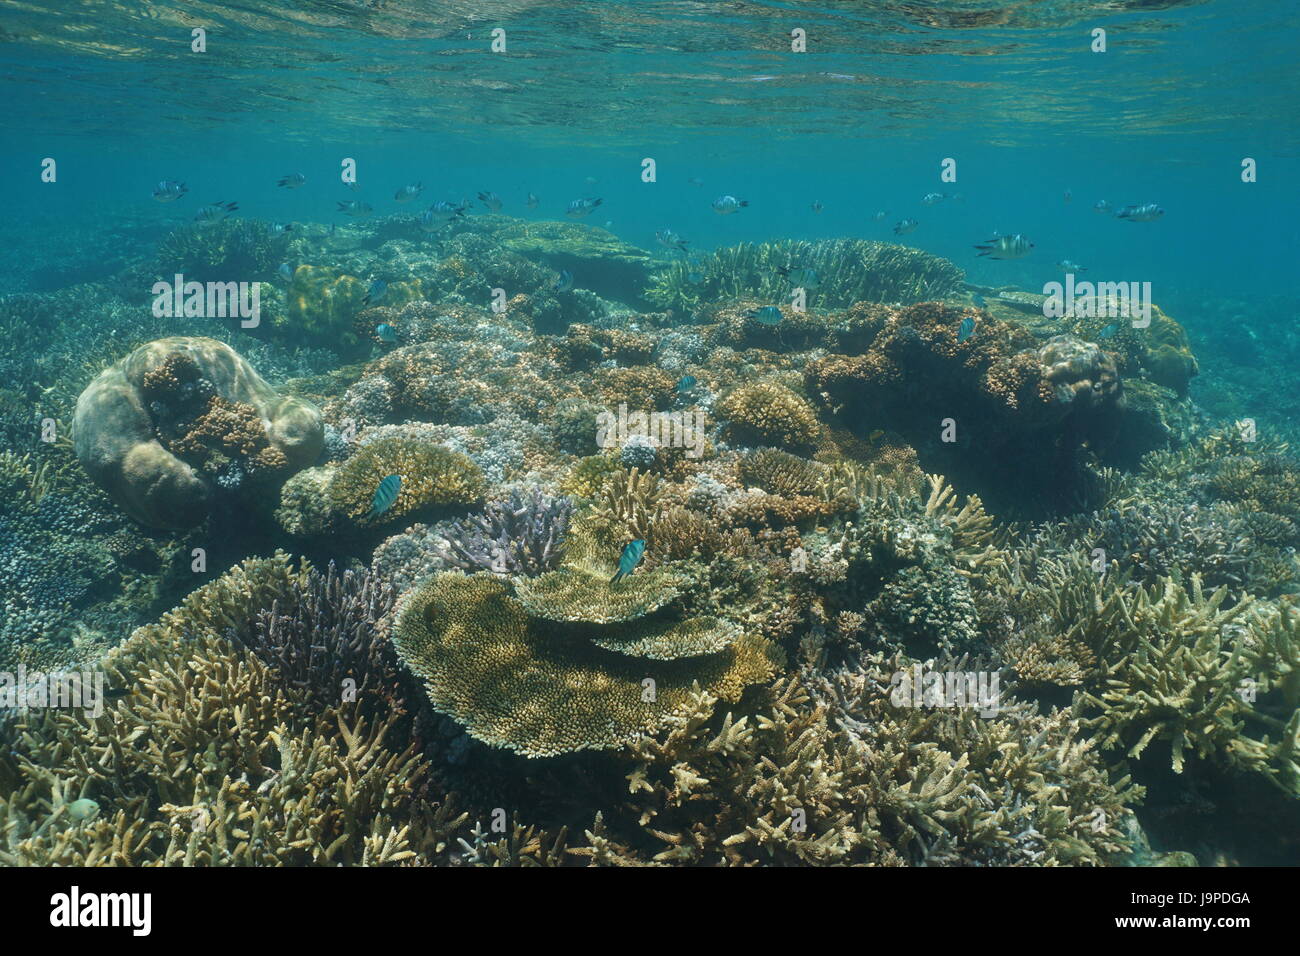 Healthy coral reef underwater with soft and stony corals in shallow water, lagoon of Grande-Terre island, New Caledonia, south Pacific ocean Stock Photo